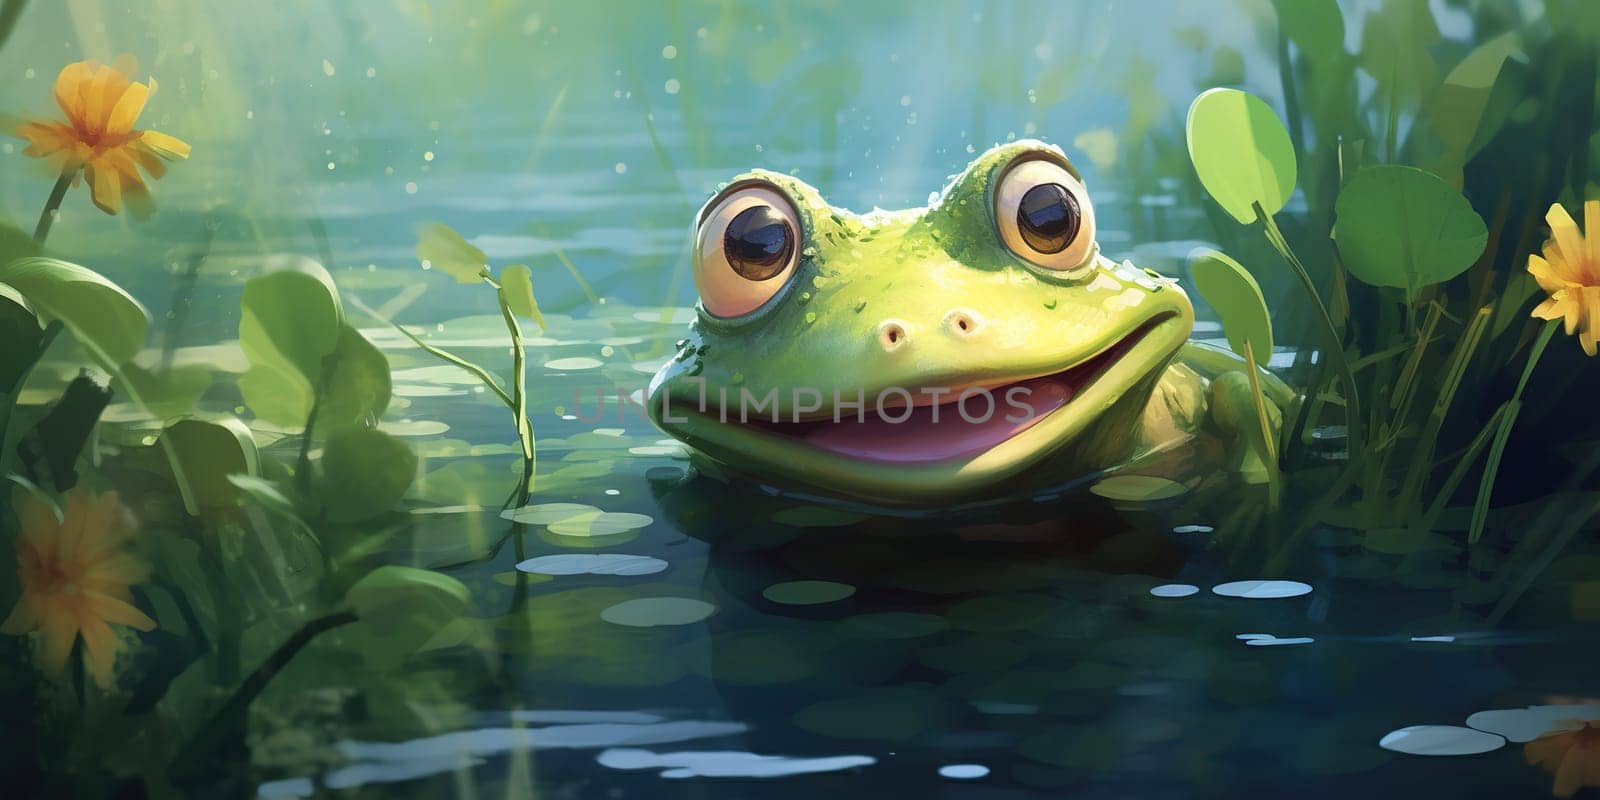 Portrait of smiling frog in the nature, tailless amphibian with a short squat body, moist smooth skin, and very long hind legs for leaping